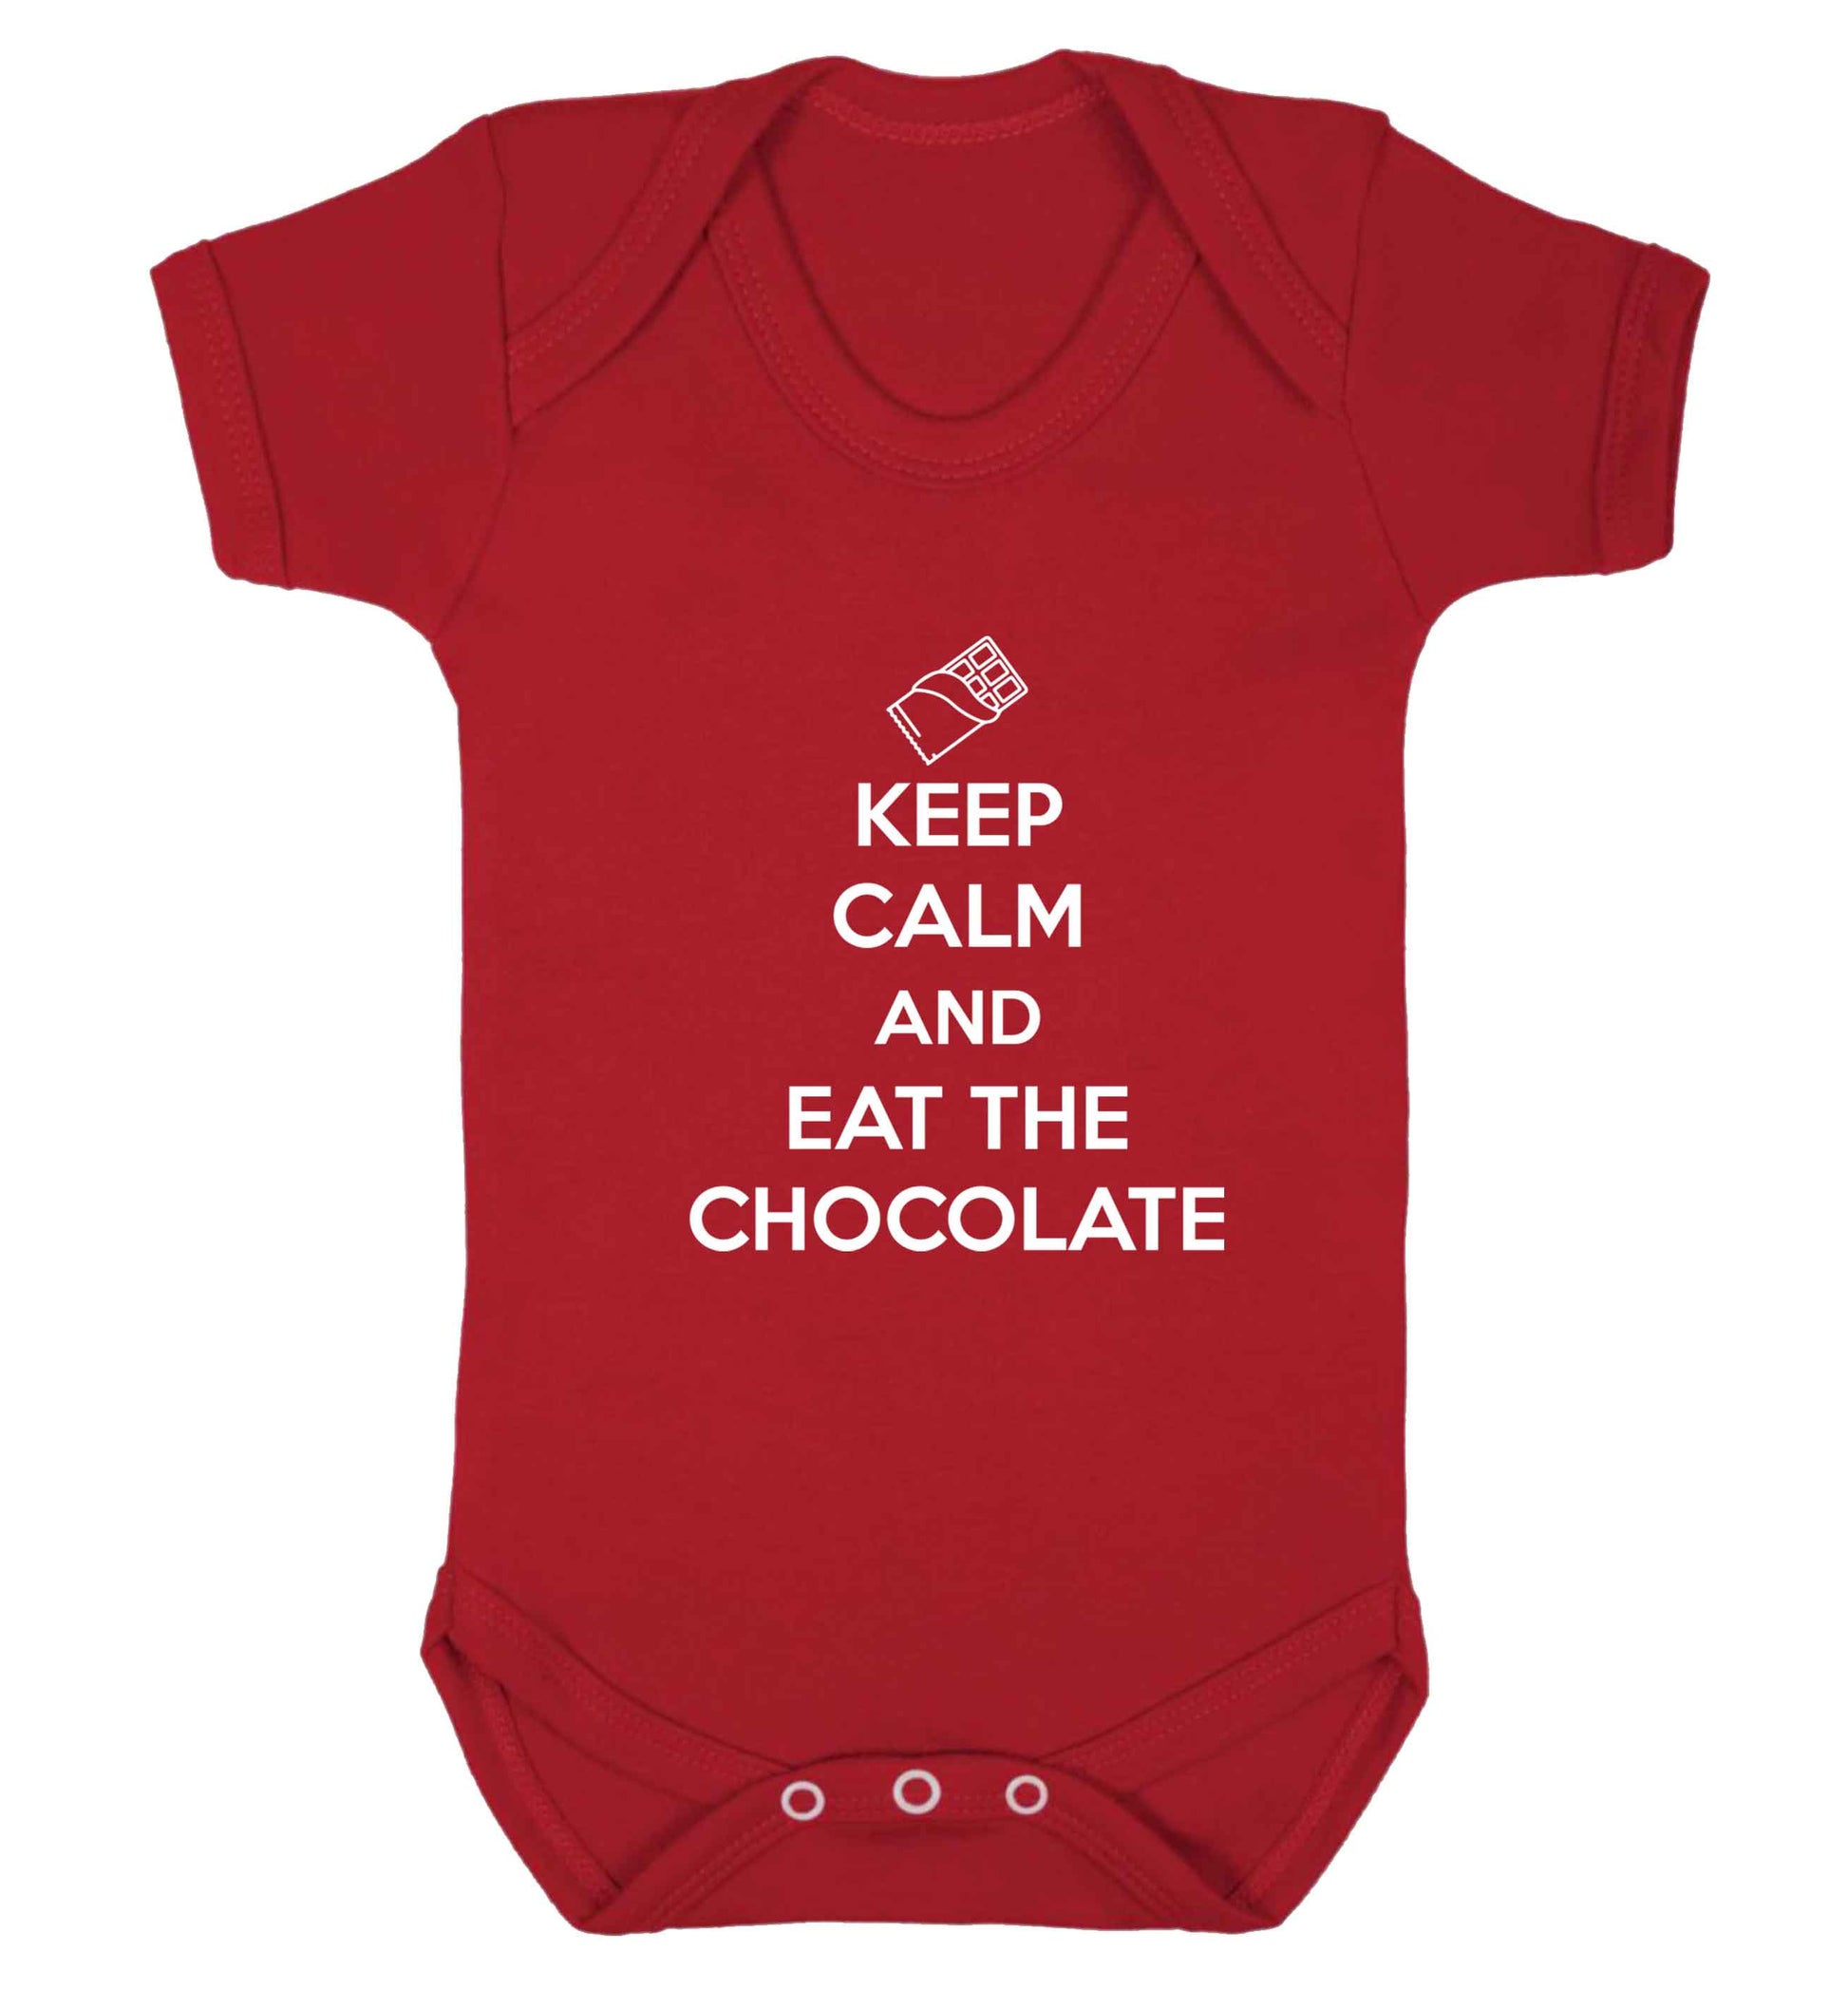 funny gift for a chocaholic! Keep calm and eat the chocolate baby vest red 18-24 months